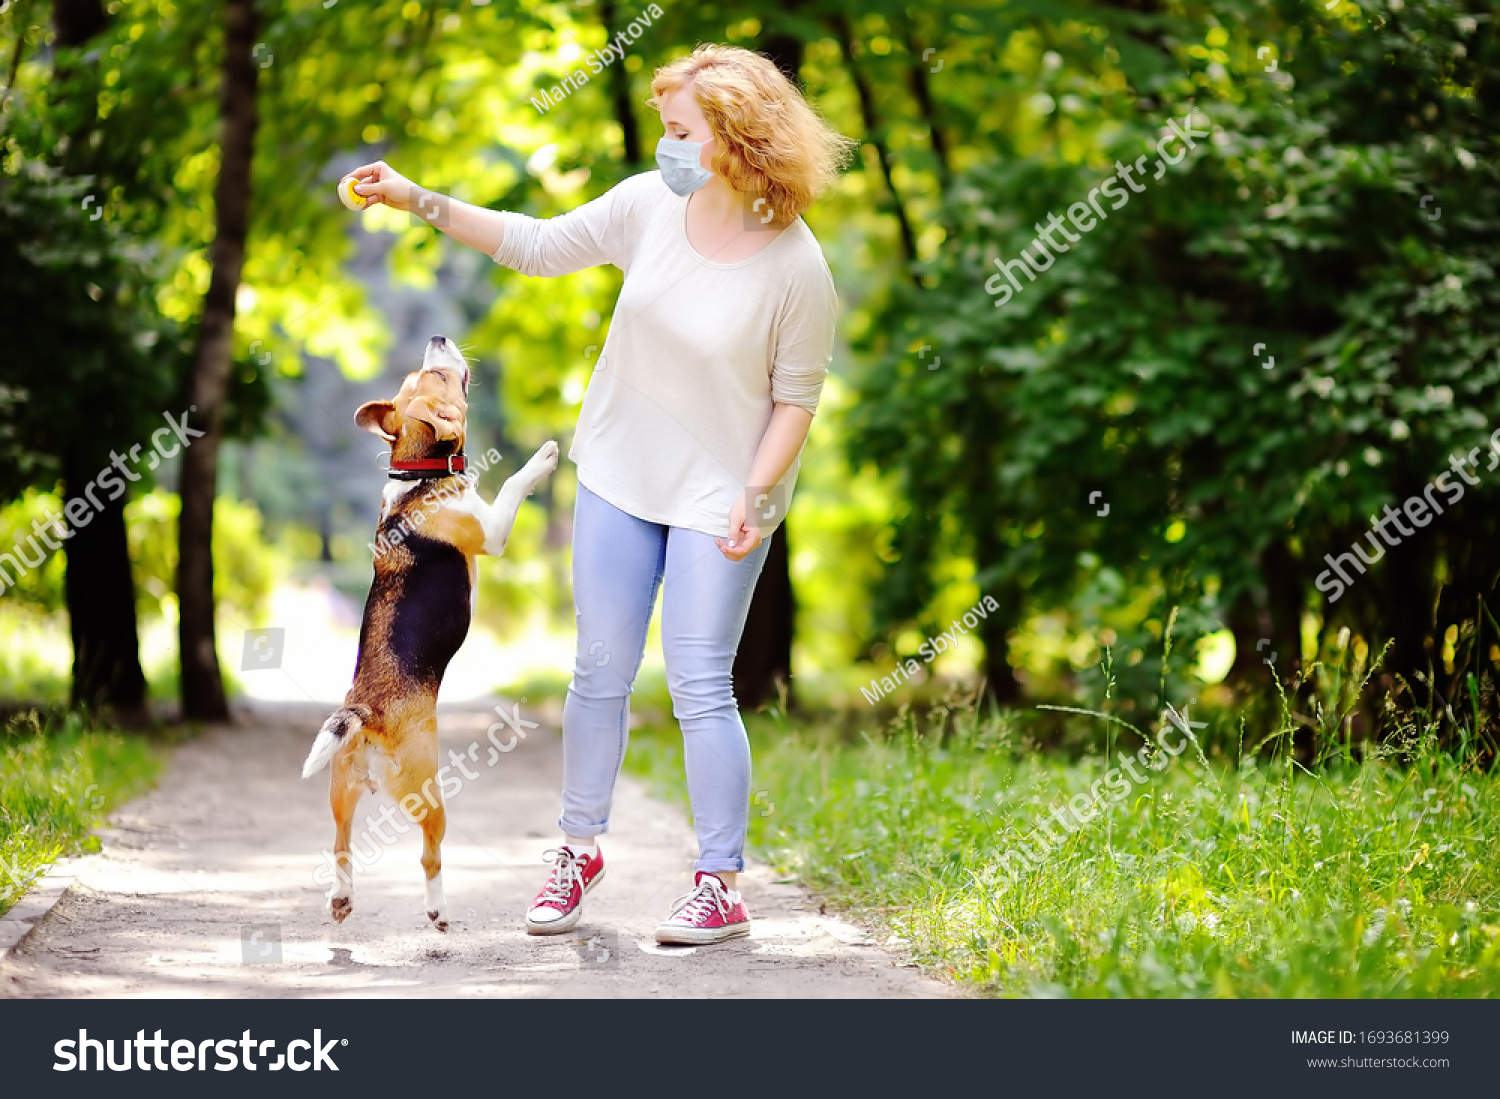 Young beautiful woman wearing disposable medical face mask playing with Beagle dog in the park during coronavirus outbreak. Walking of pets. Safety in a public place while epidemic of covid-19.